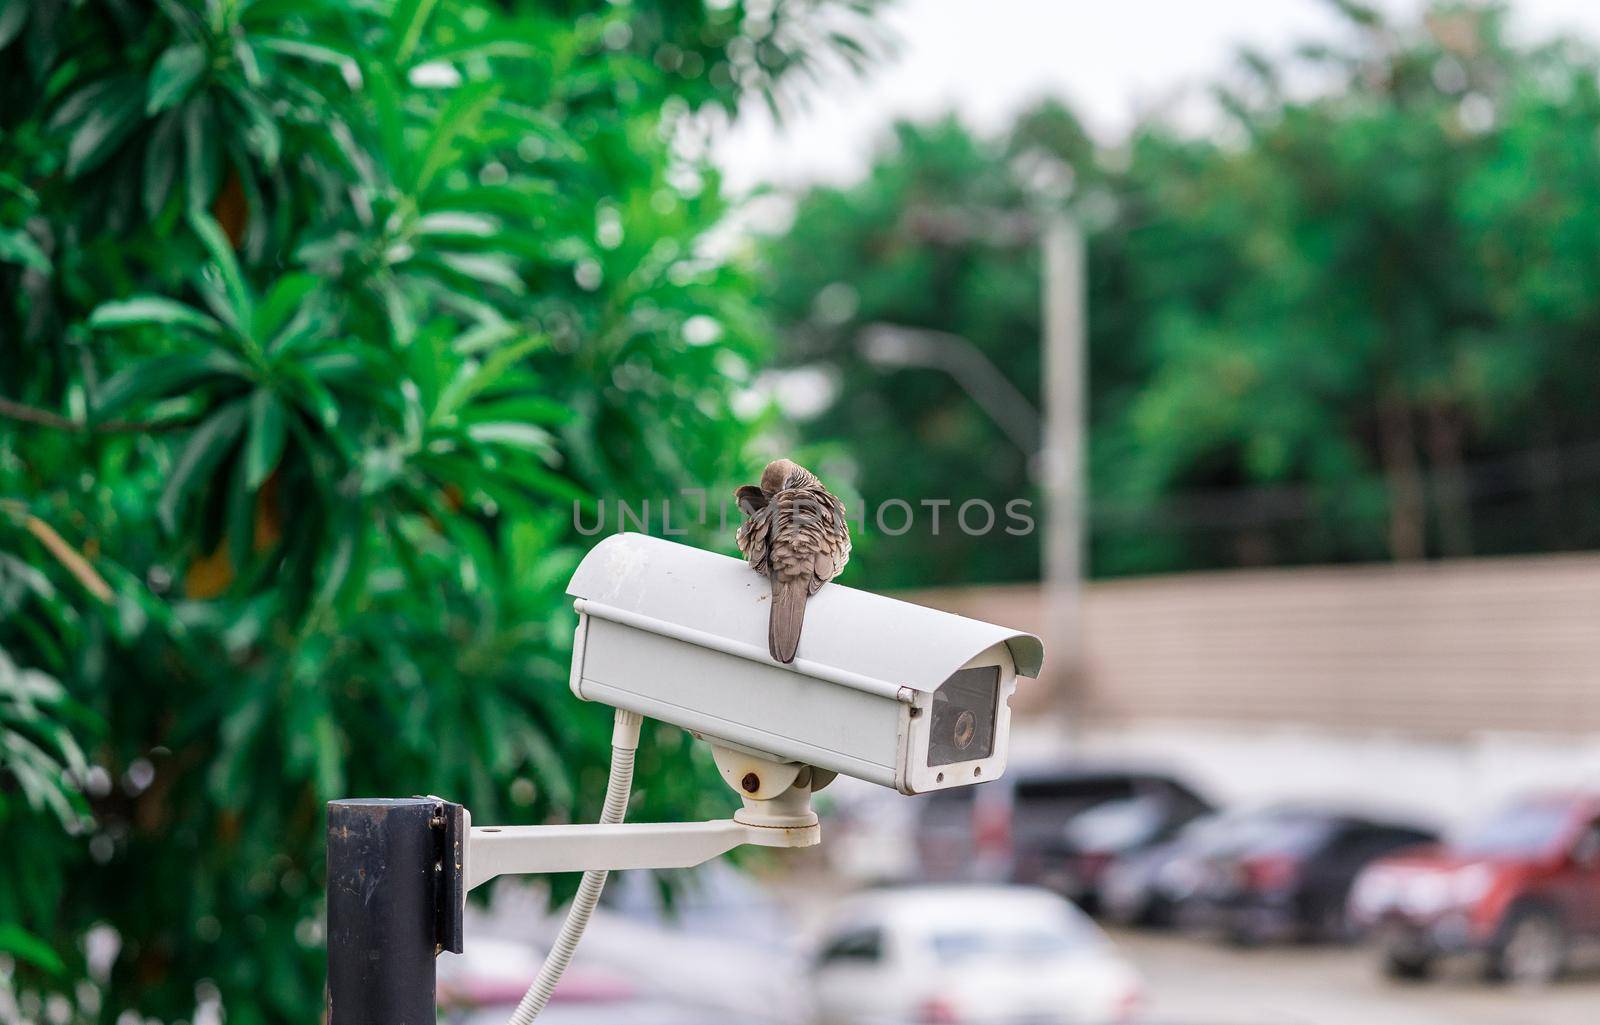 CCTV camera installed on the parking lot for protection security by domonite